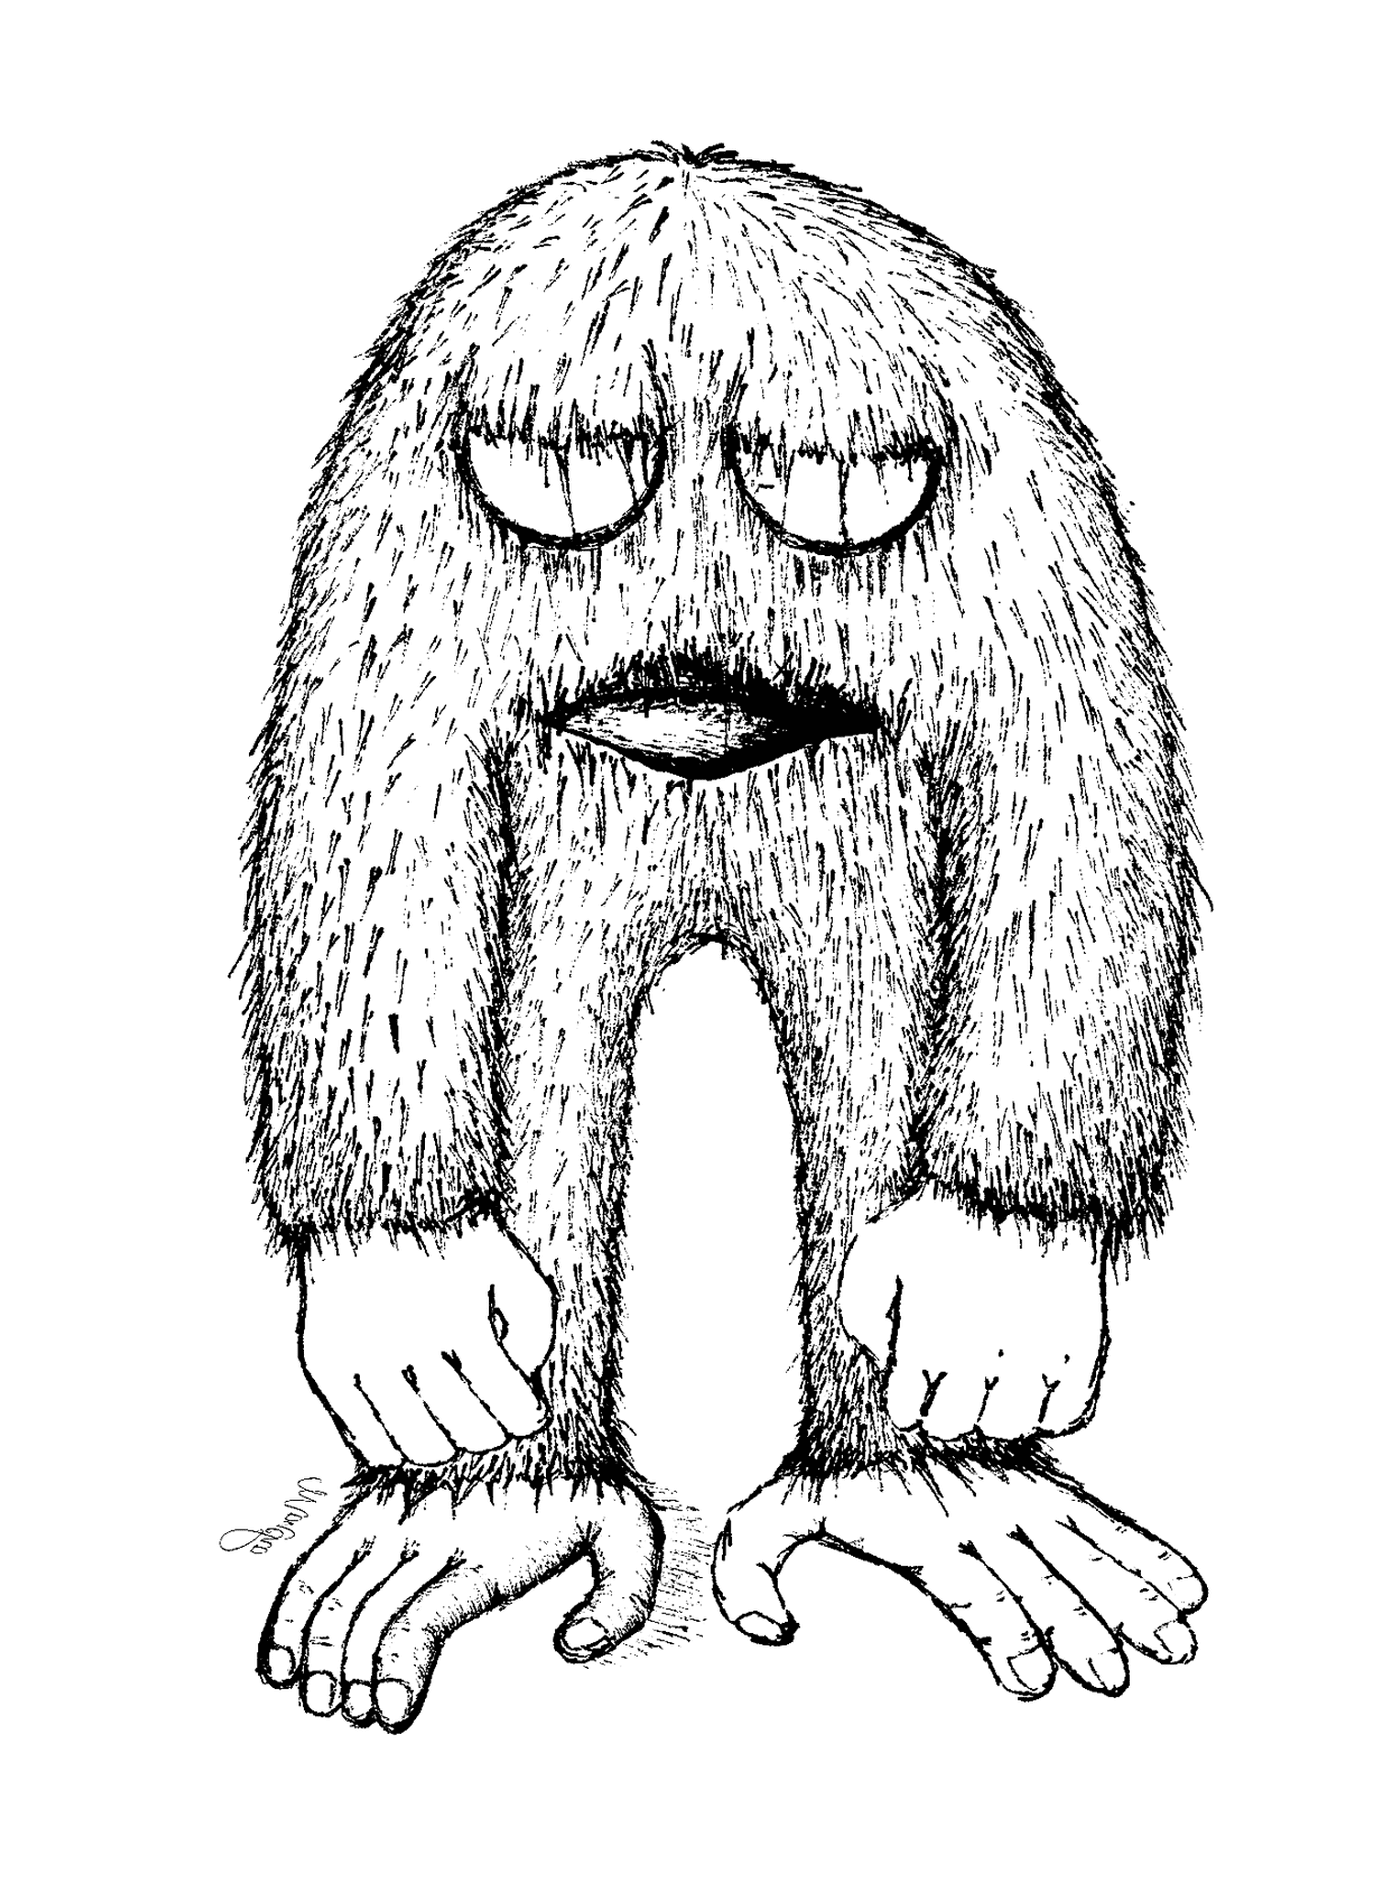  Hairy creature with imposing face 